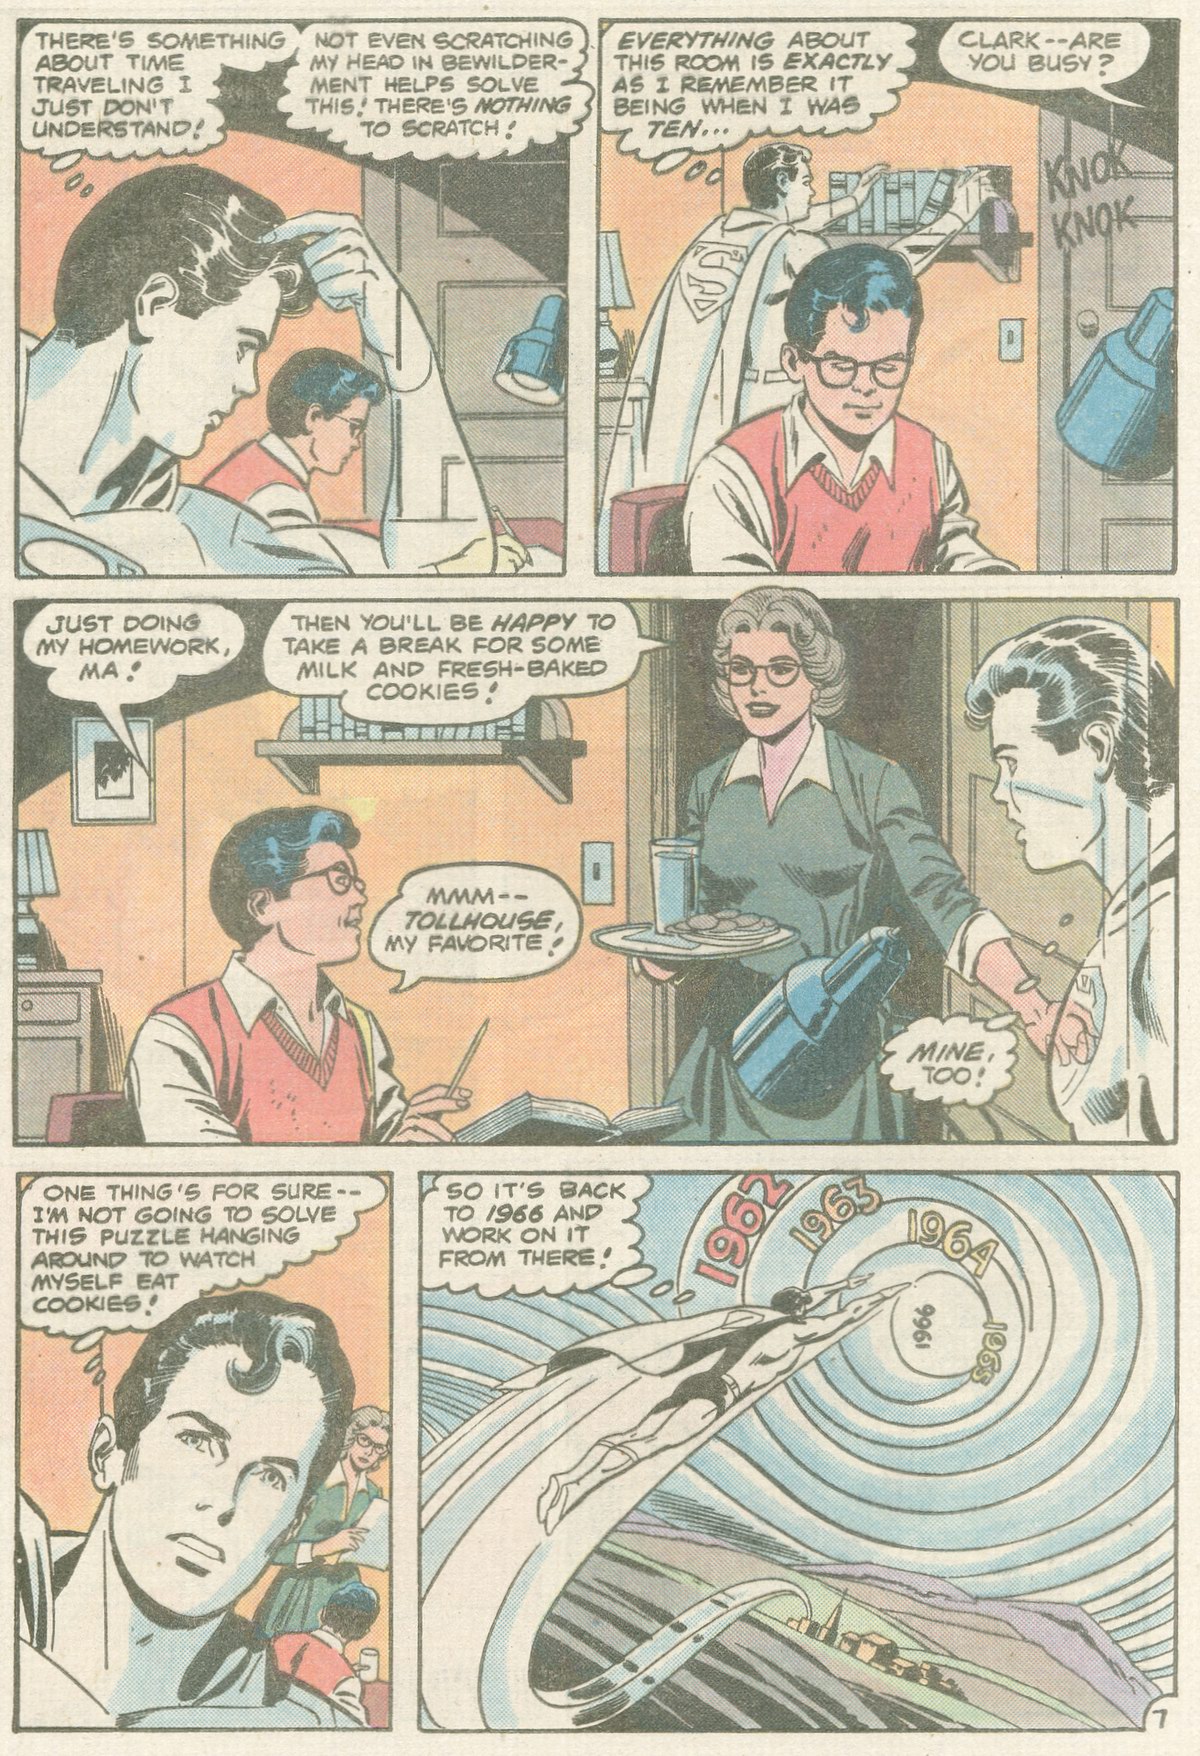 The New Adventures of Superboy 26 Page 26